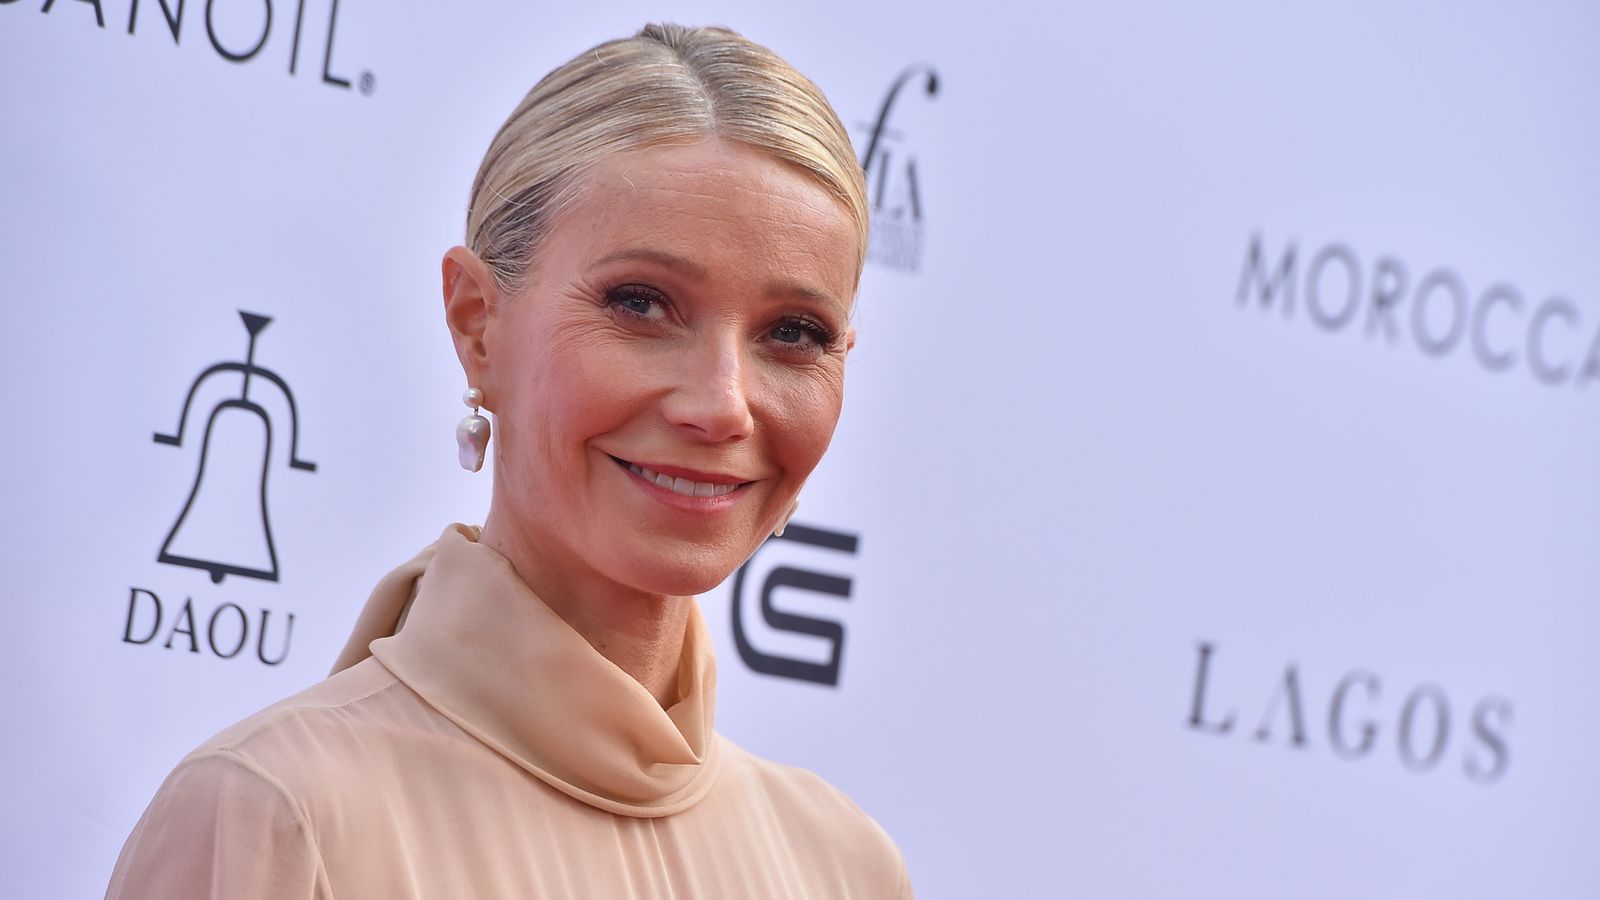 Gwyneth Paltrow calls 'nepo baby' an 'ugly moniker' after daughter Apple starts modelling career